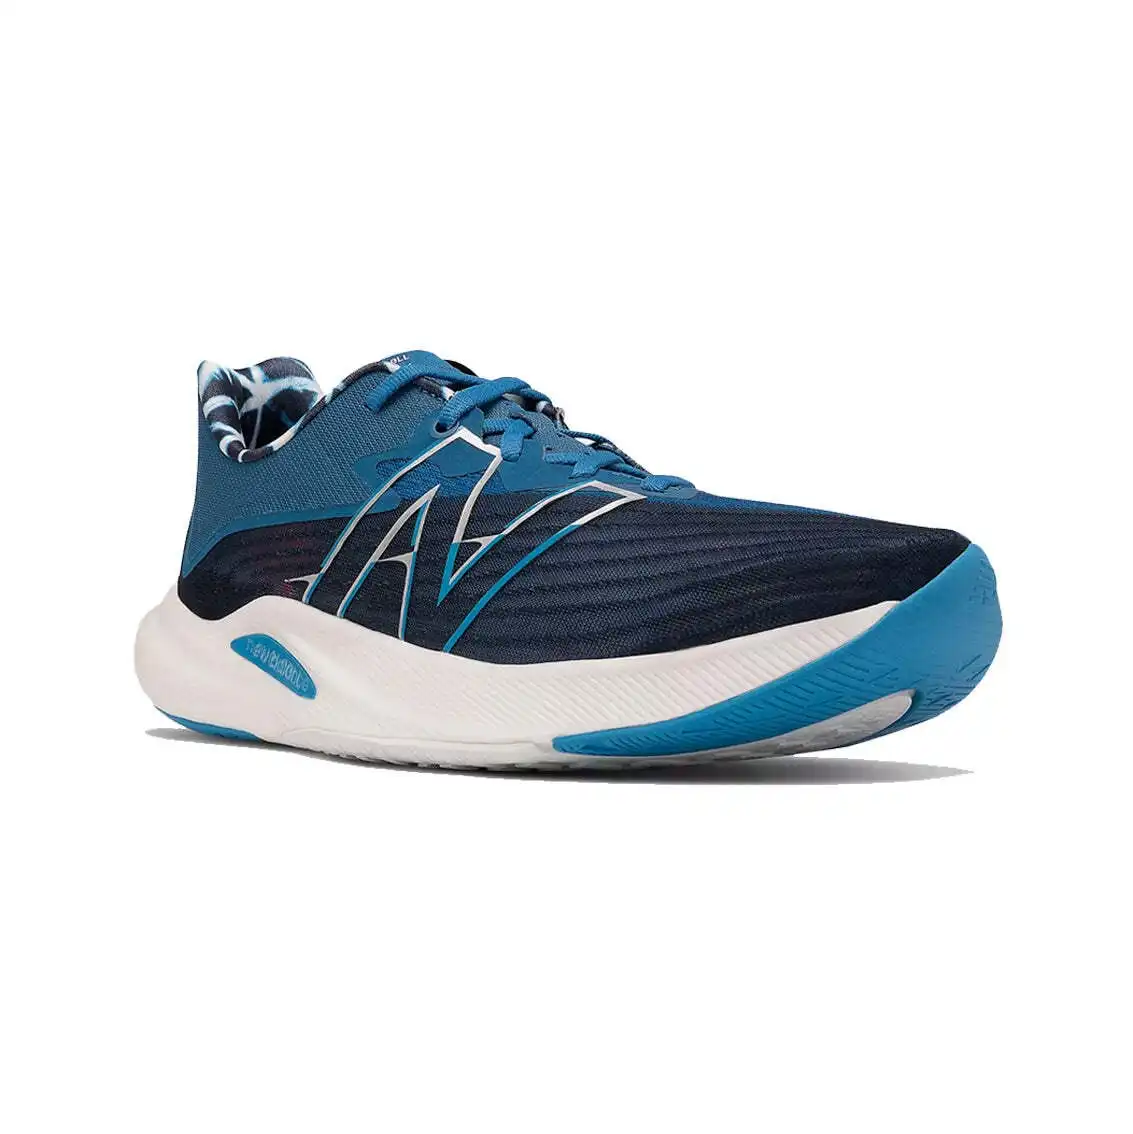 New Balance Women's FuelCell Rebel V2 Athletic Running Shoes - Width B